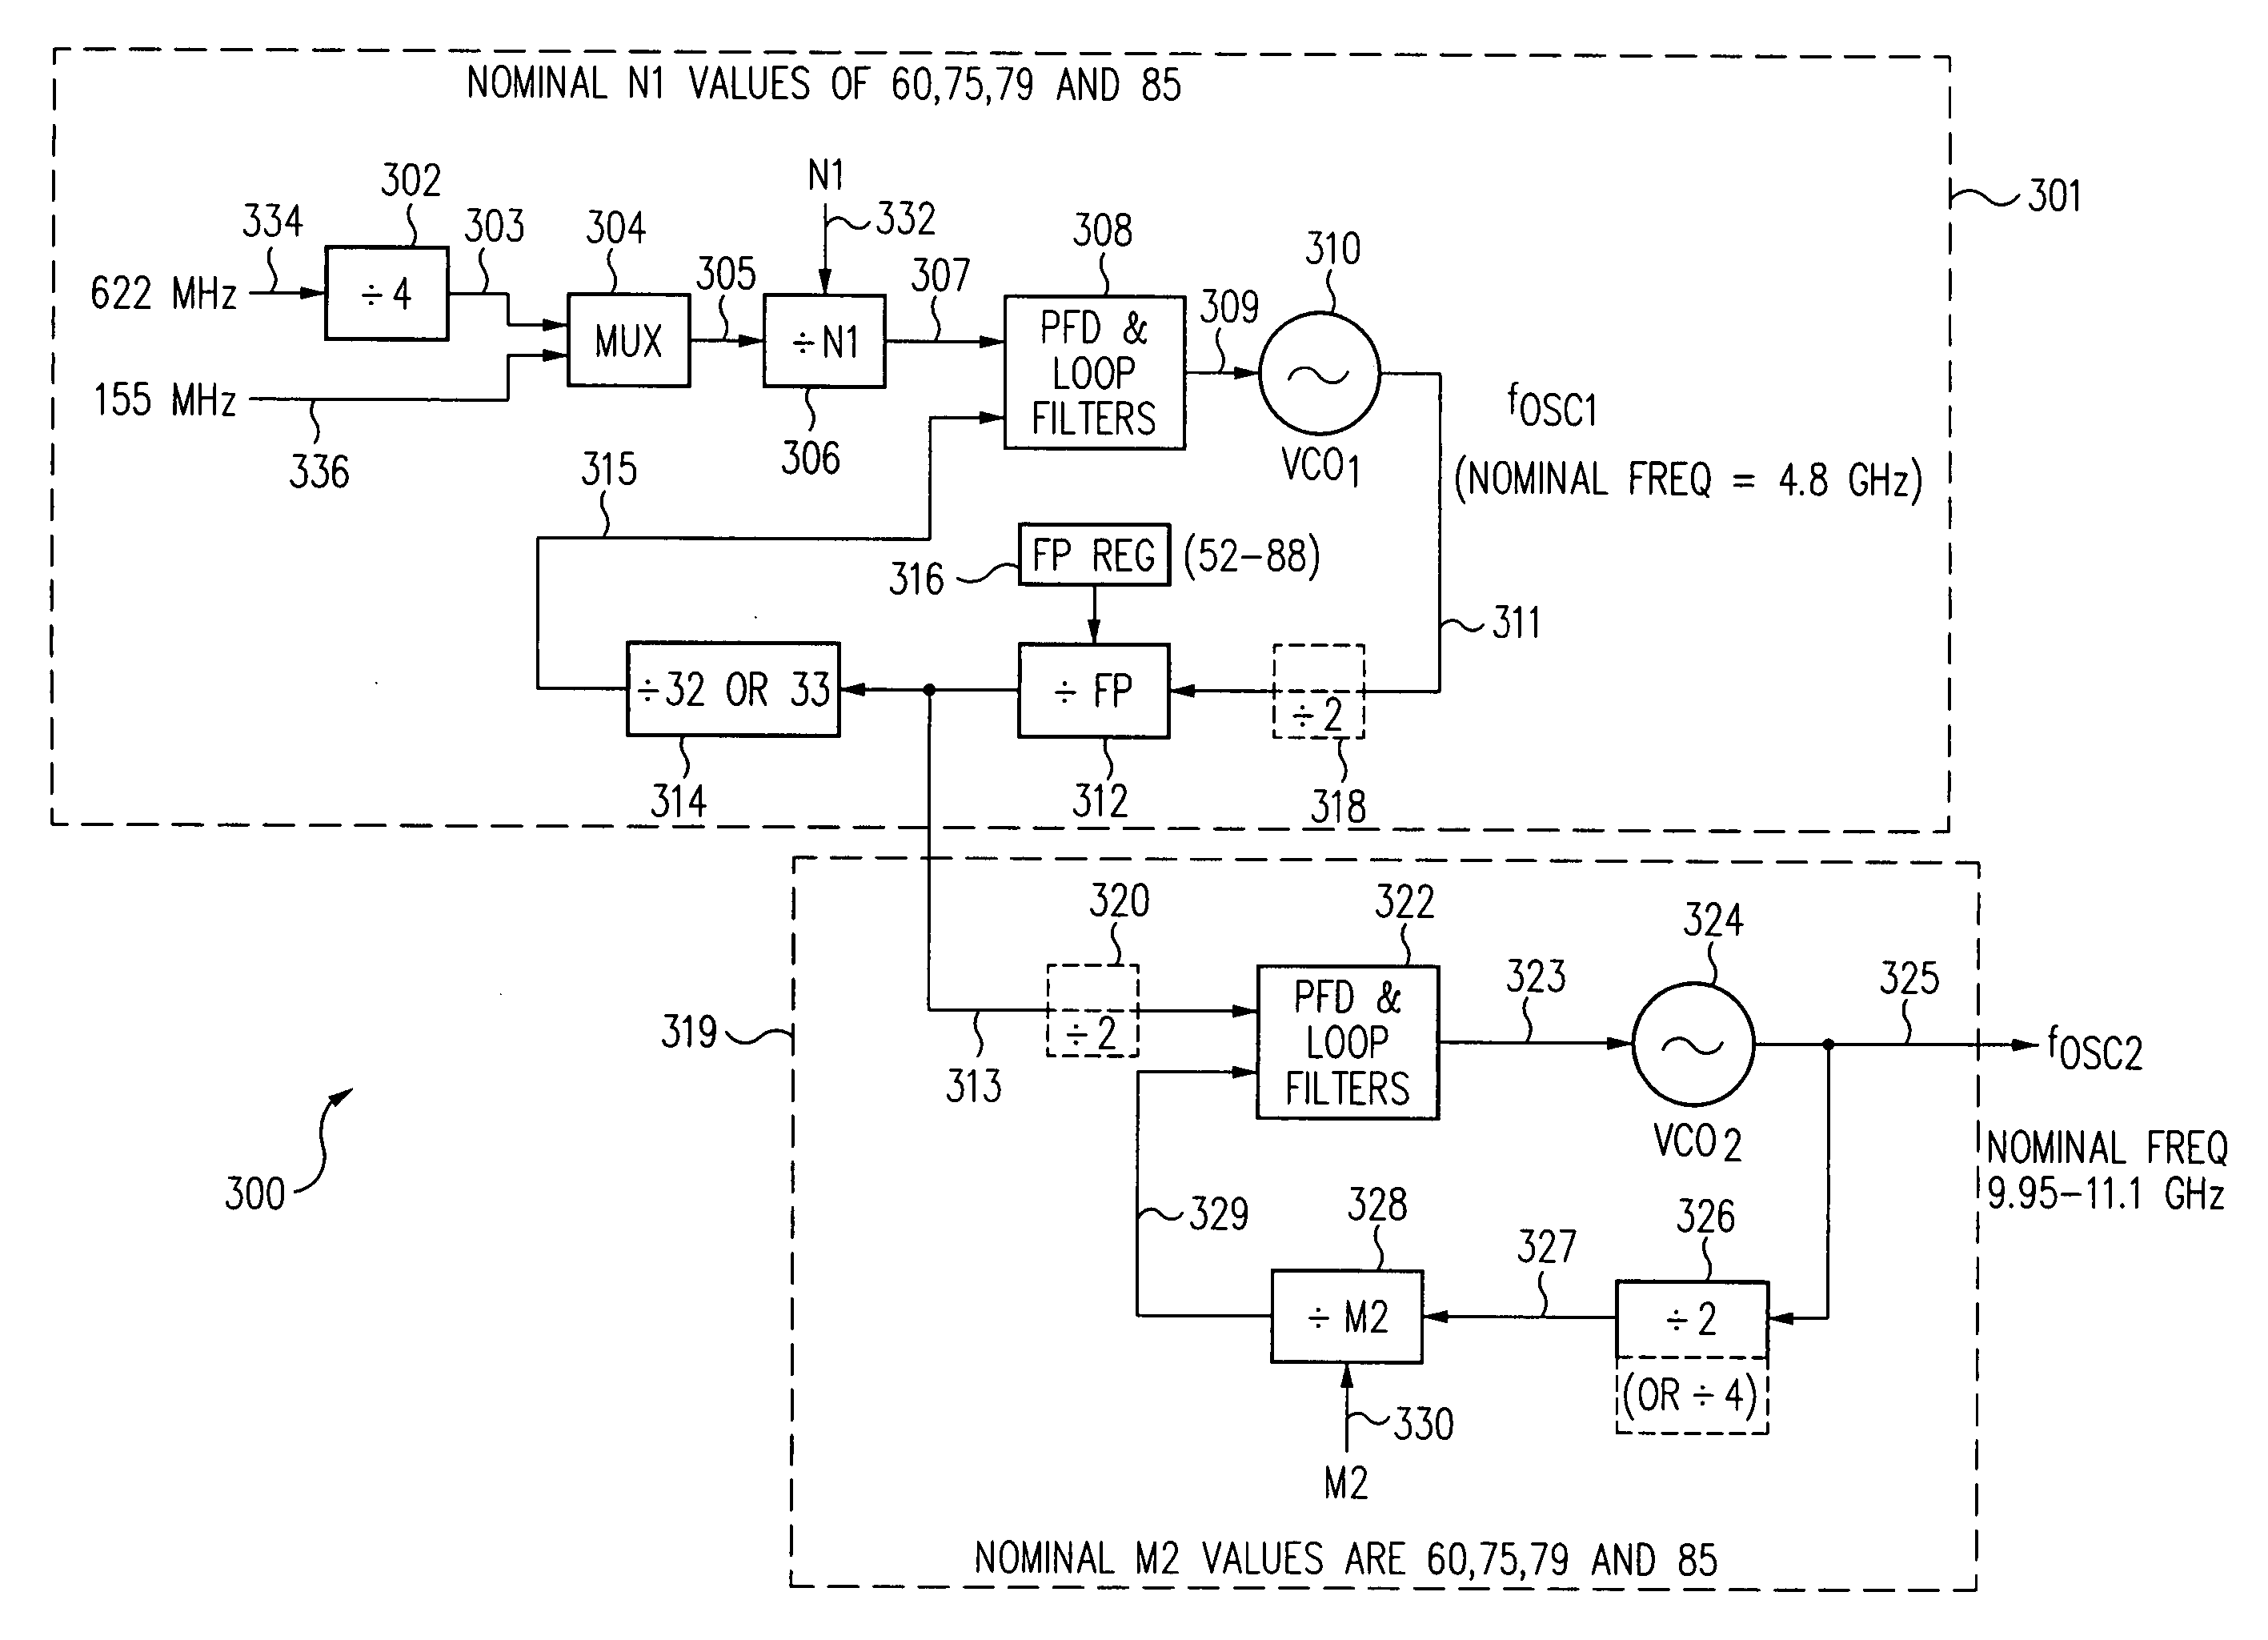 Configurable circuit structure having reduced susceptibility to interference when using at least two such circuits to perform like functions